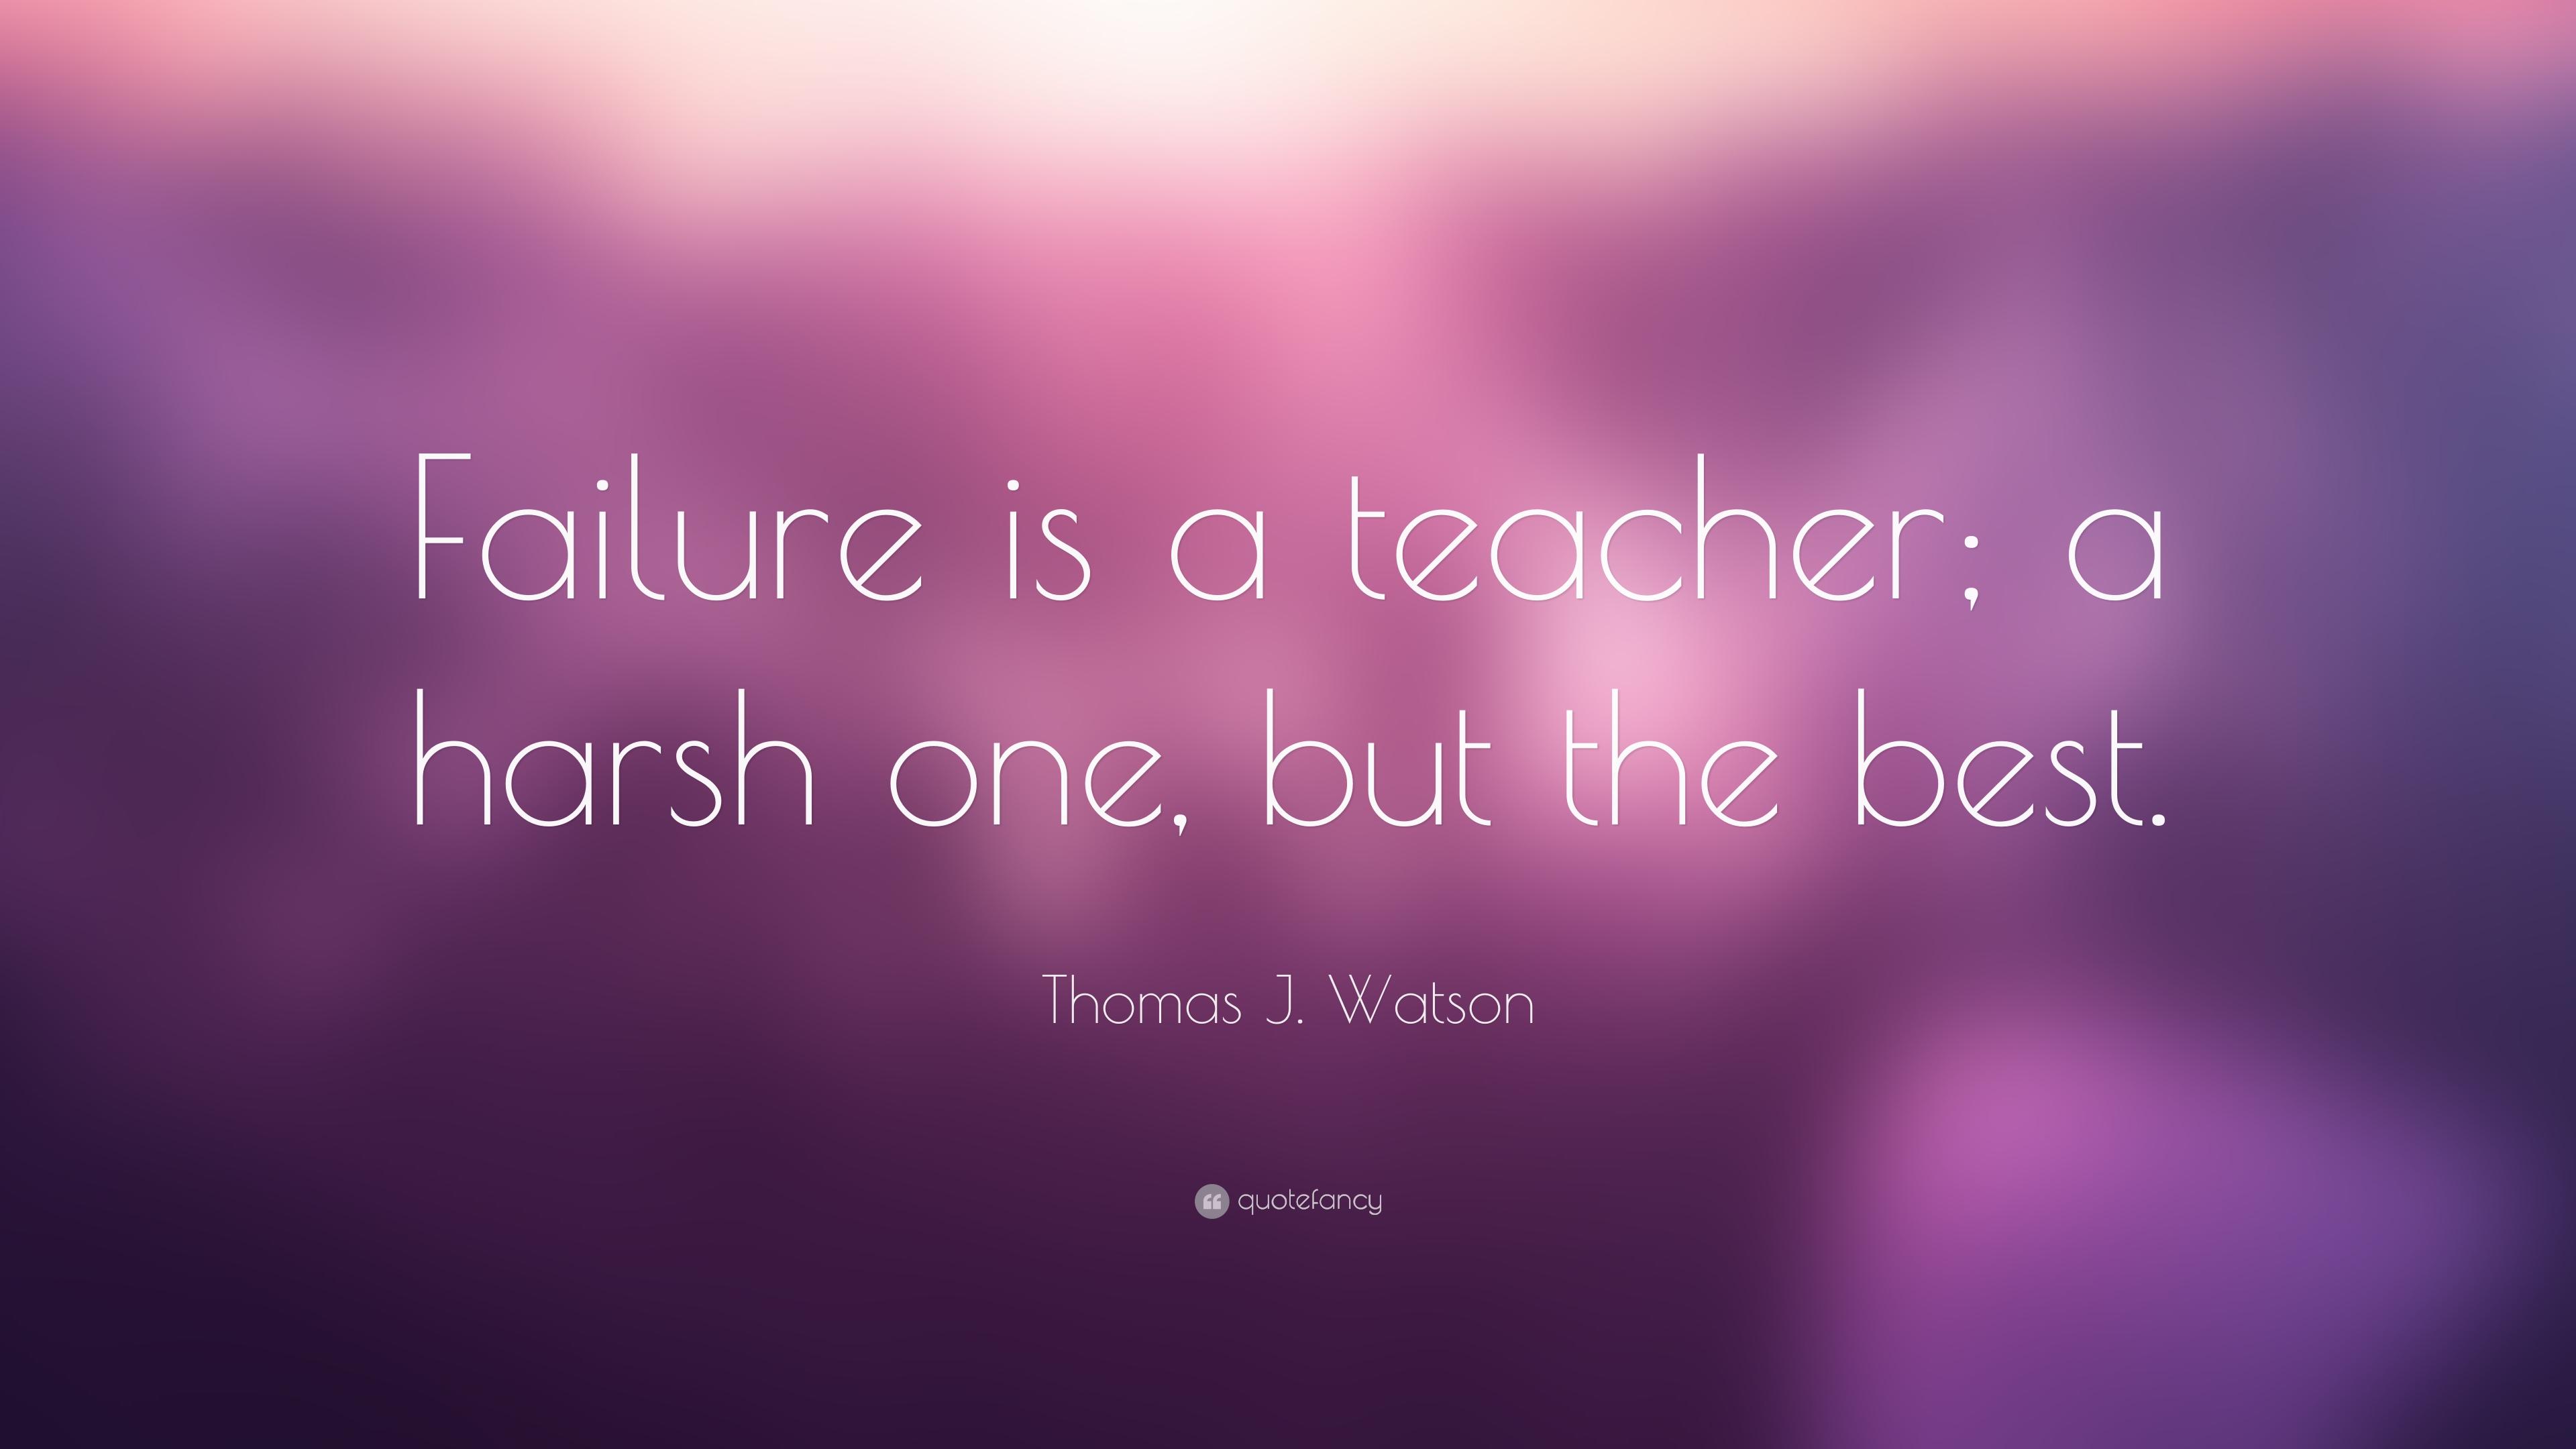 Thomas J. Watson Quote: “Failure is a teacher; a harsh one, but the best.” (10 wallpaper)